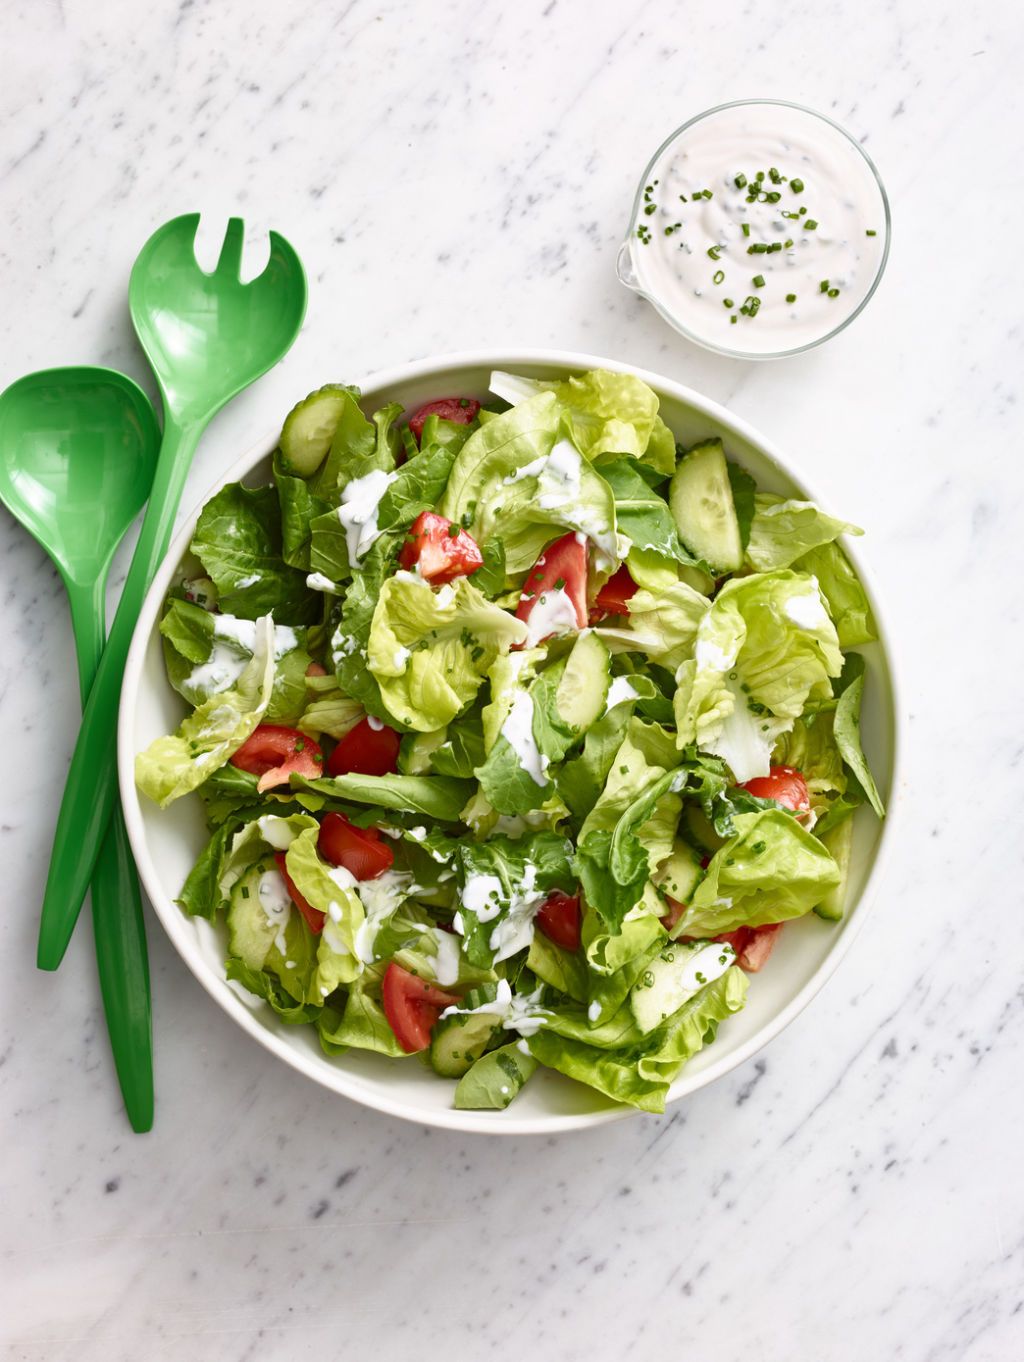 <p>You can make this dressing up to 3 days ahead!  Refrigerate the dressing without the chives. A day ahead, prep the lettuce and cucumbers and refrigerate separately. Just before serving, cut the tomatoes and stir in the chives. </p> <p><strong>Recipe:</strong> <a href="salad-creamy-ranch-dressing-wdy0315" target="_blank"><strong>Salad with Creamy Ranch Dressing</strong></a></p>